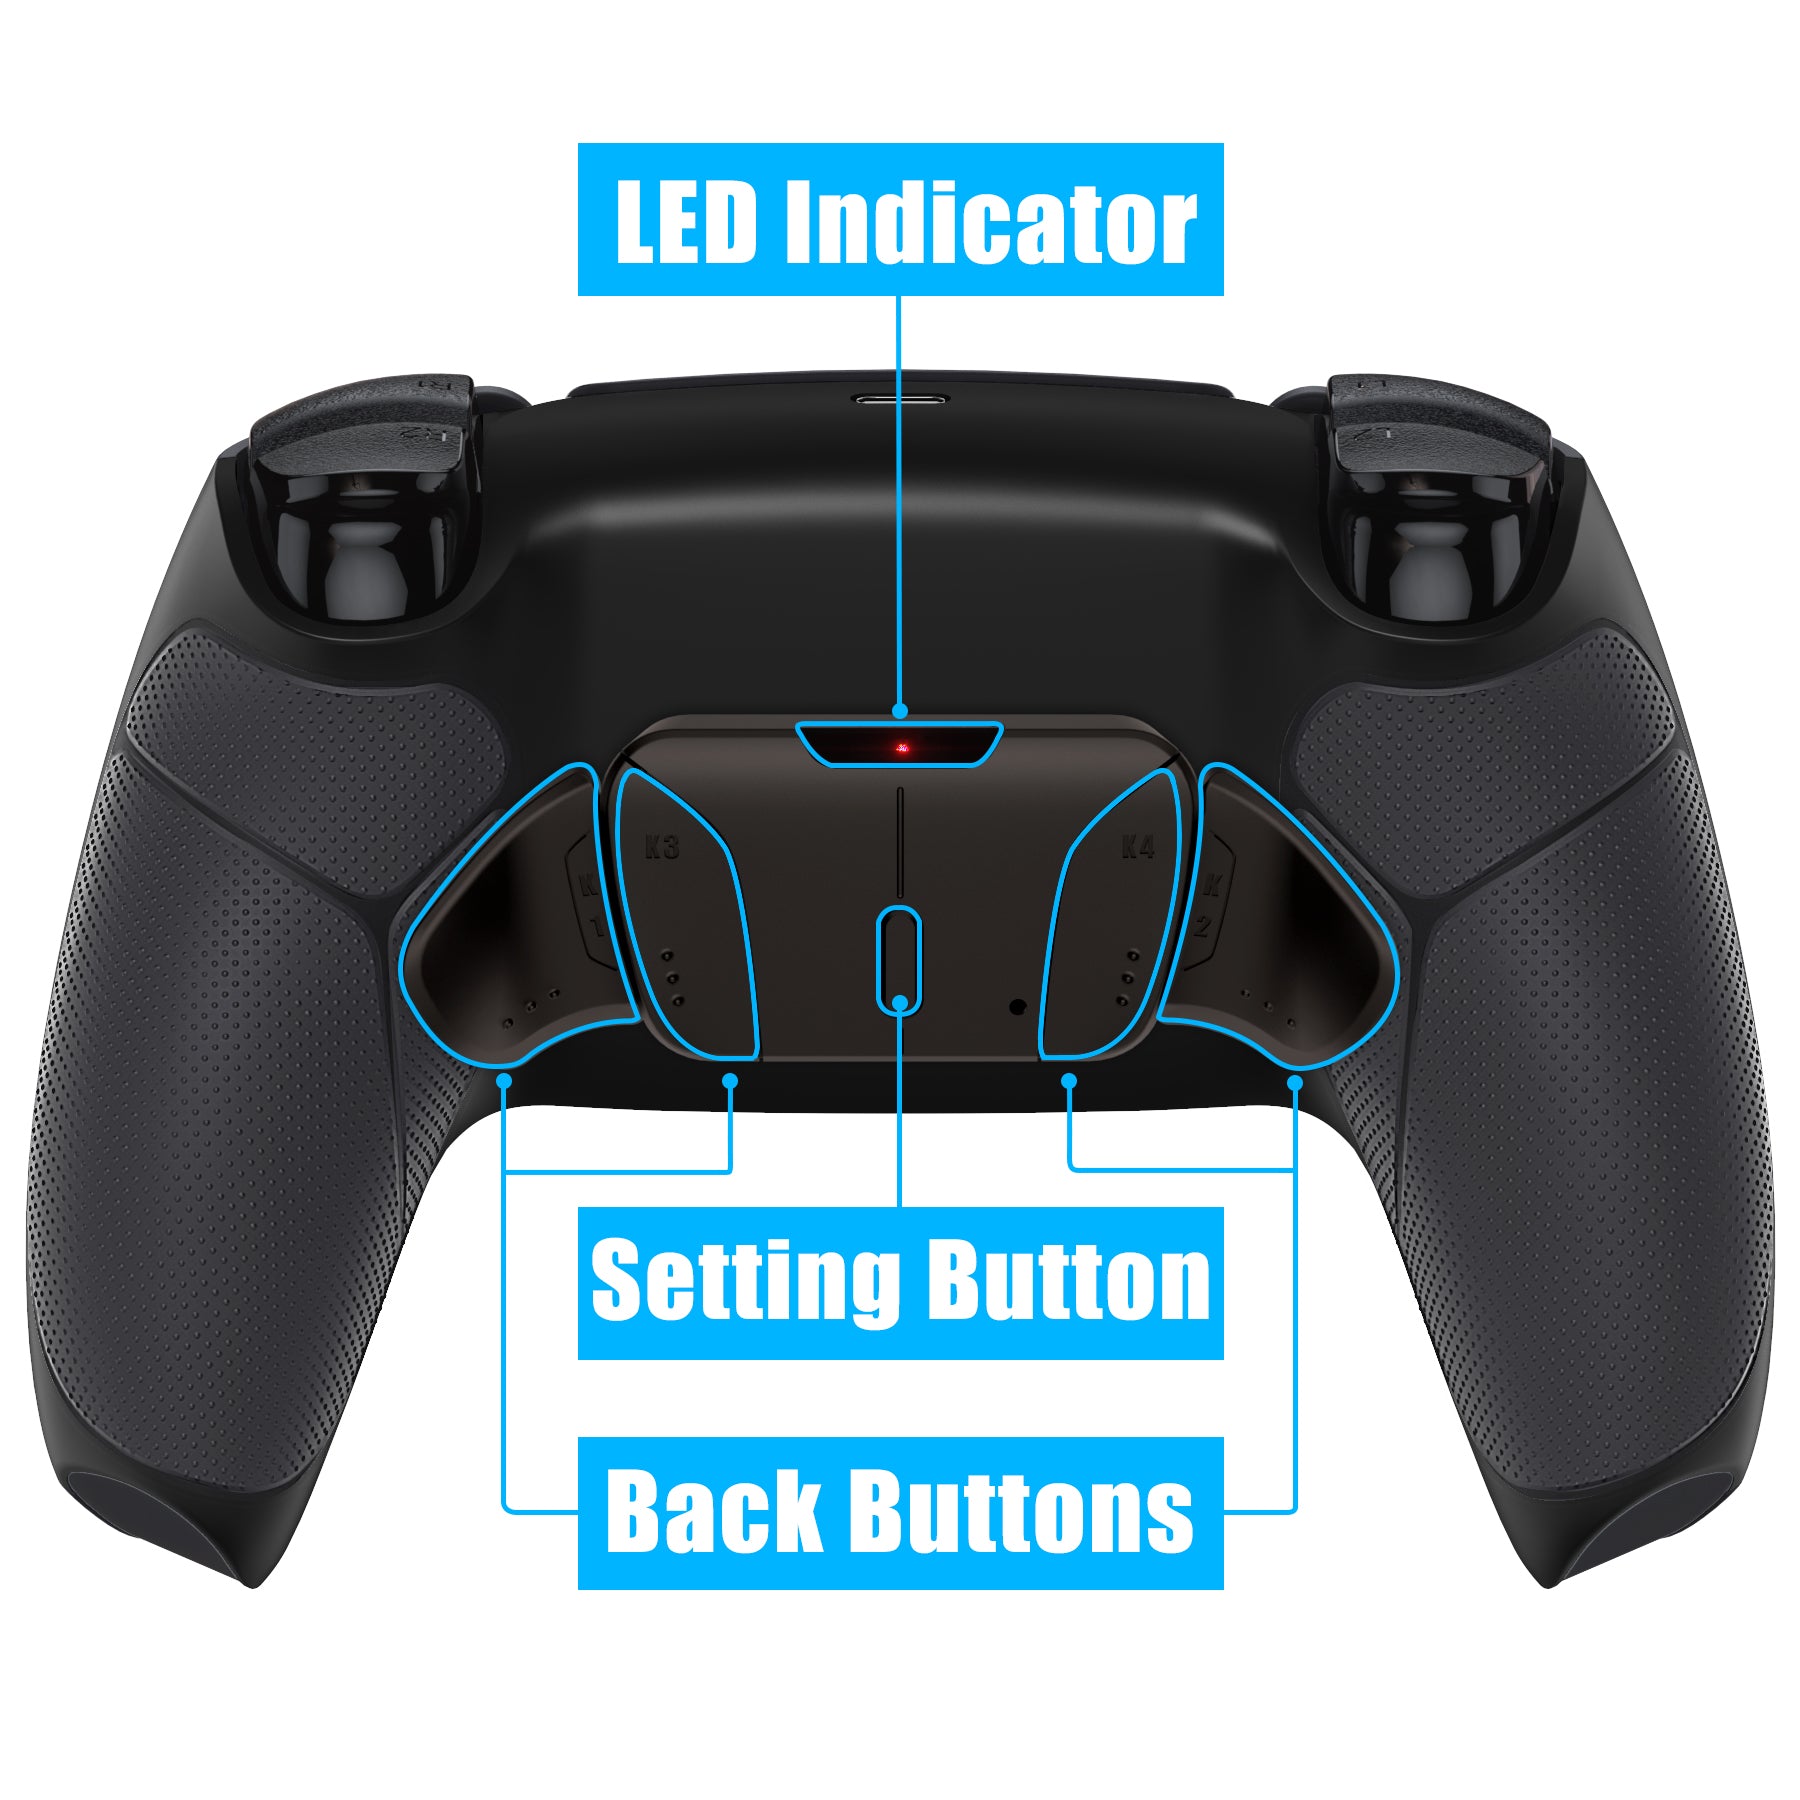 eXtremeRate Retail Rubberized Black Remappable Real Metal Buttons (RMB) Version RISE4 Remap Kit for PS5 Controller BDM-030, Upgrade Board & Redesigned Back Shell & 4 Back Buttons for PS5 Controller - YPFJ7001G3